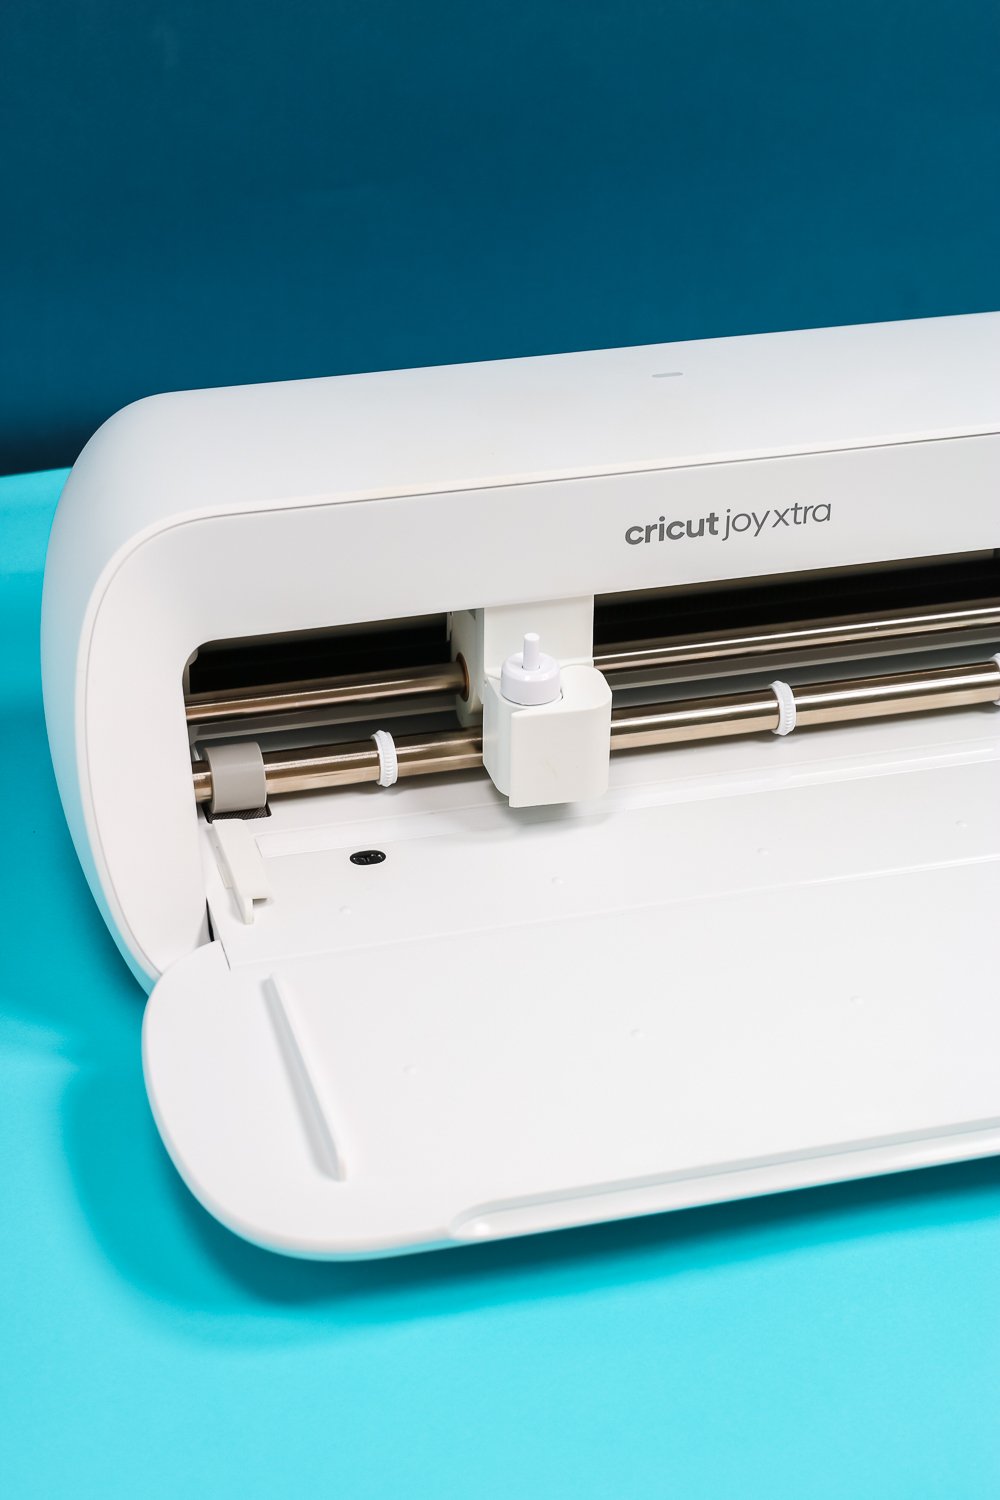 Cricut Joy Xtra: Everything you need to know about the new Cricut